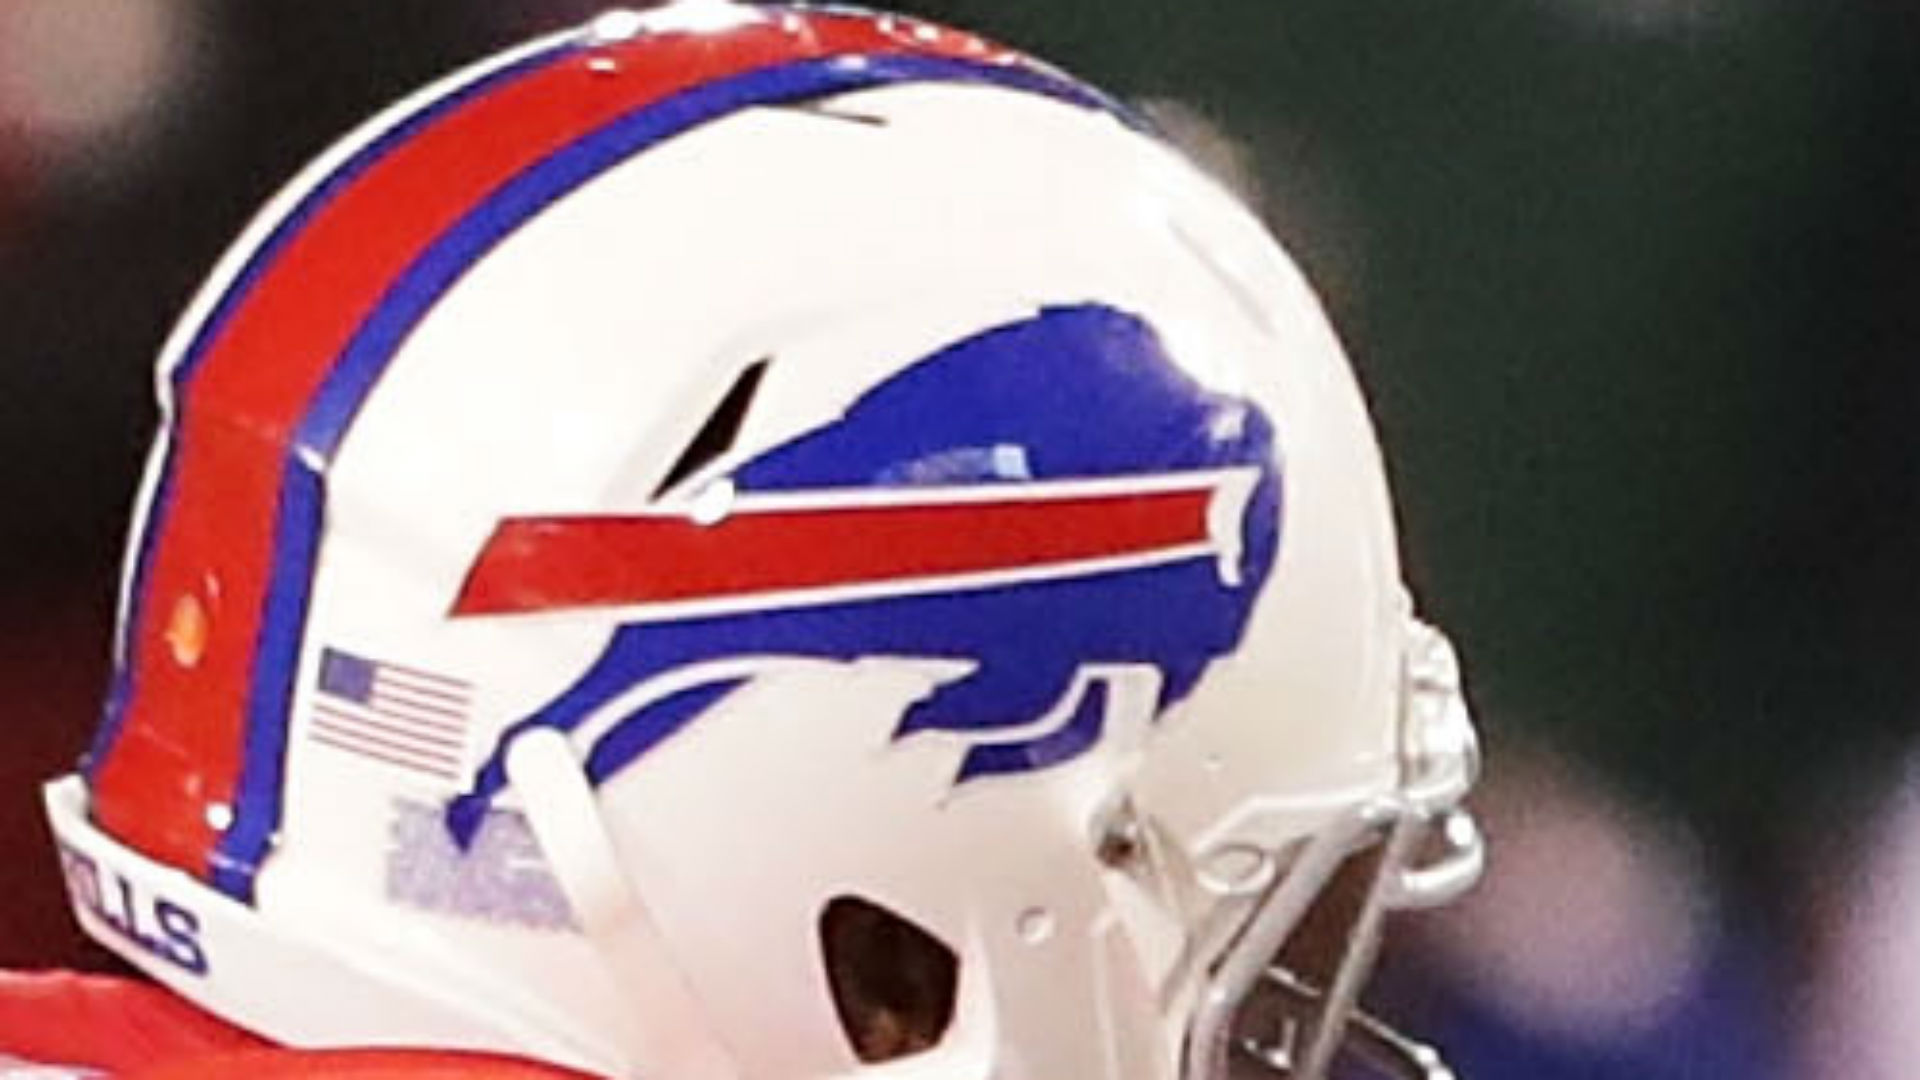 Bills rookie Tyrel Dodson arrested on domestic violence charges, report says